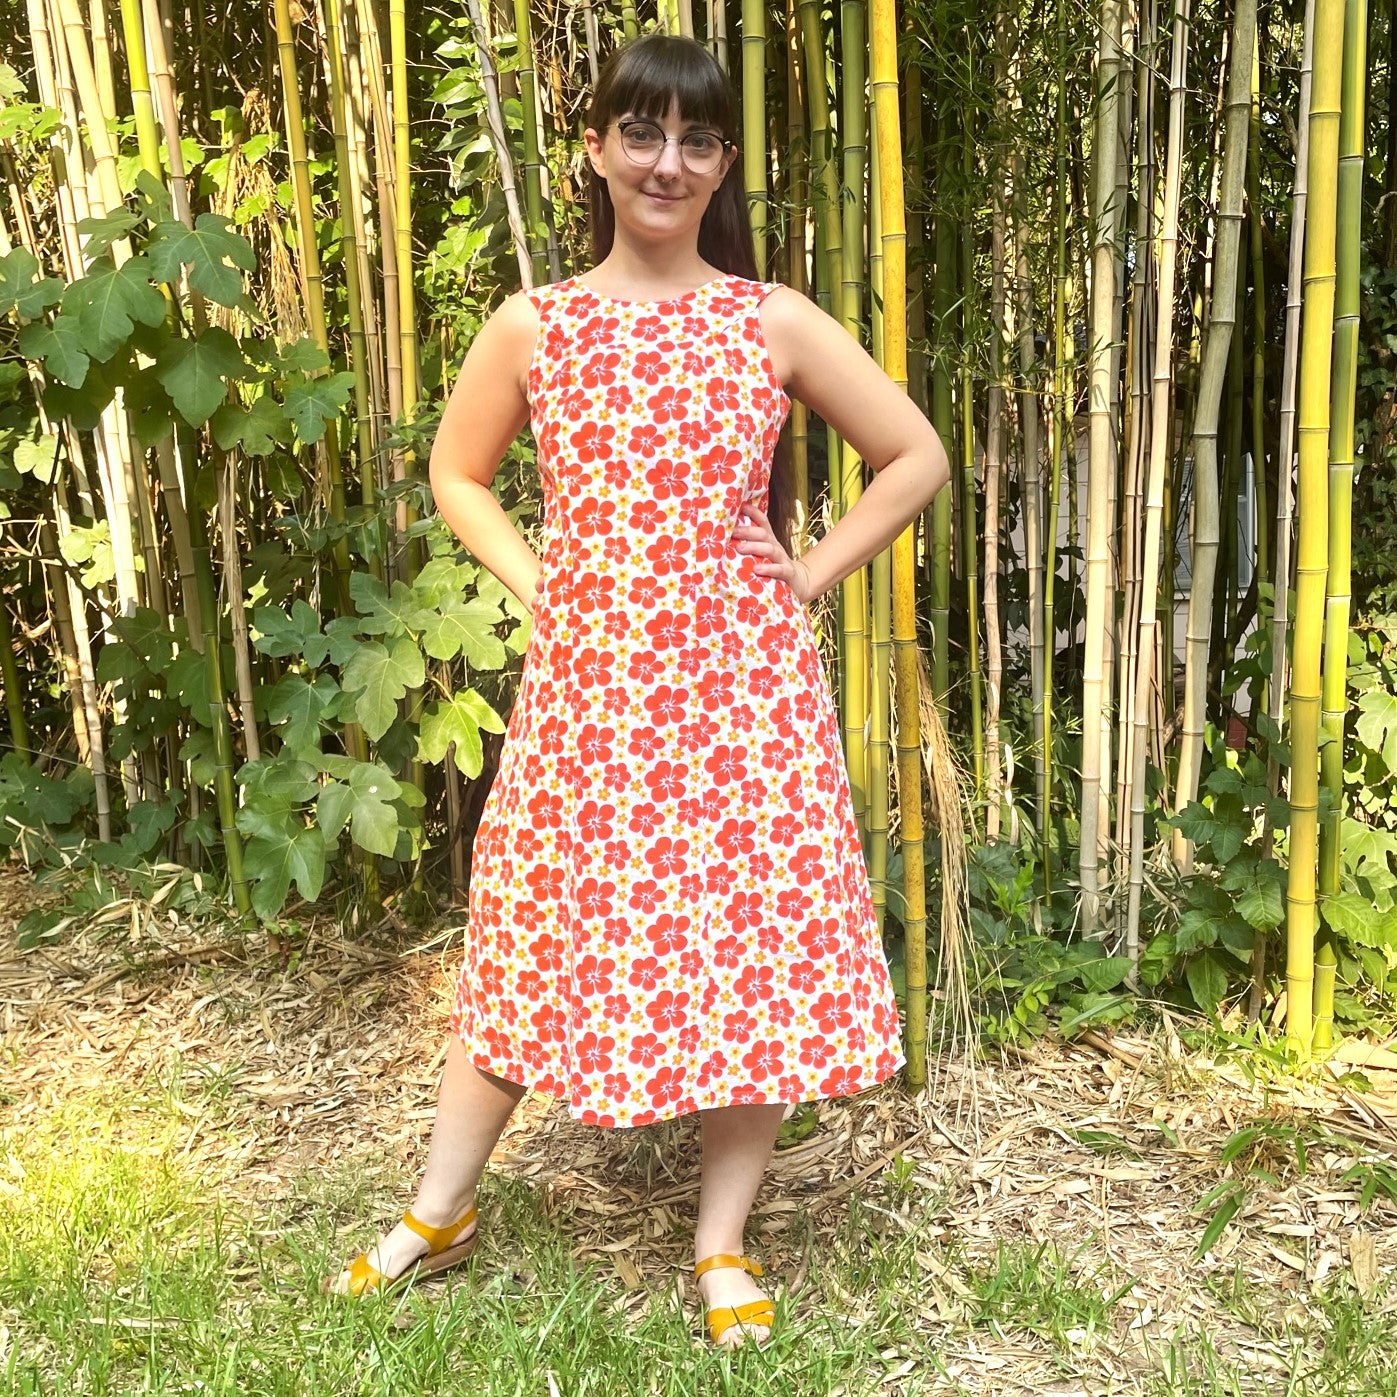 Woman standing with hands on hips in front of a bamboo forest, wearing an orange floral muumuu and yellow sandals.